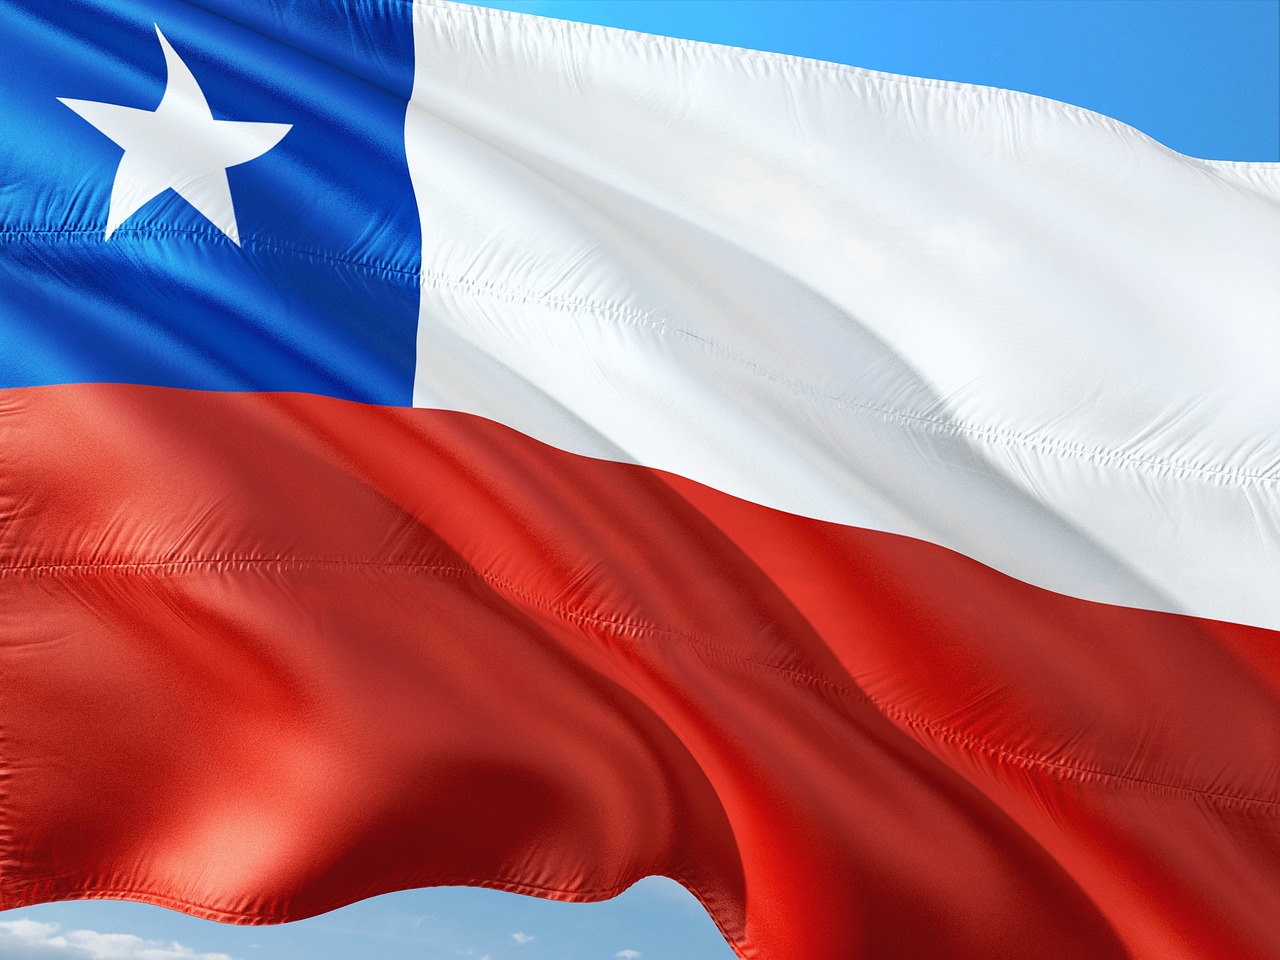 a large texas flag blowing in the wind, shutterstock, digital art, chile, view from bottom, taiwan, 1128x191 resolution